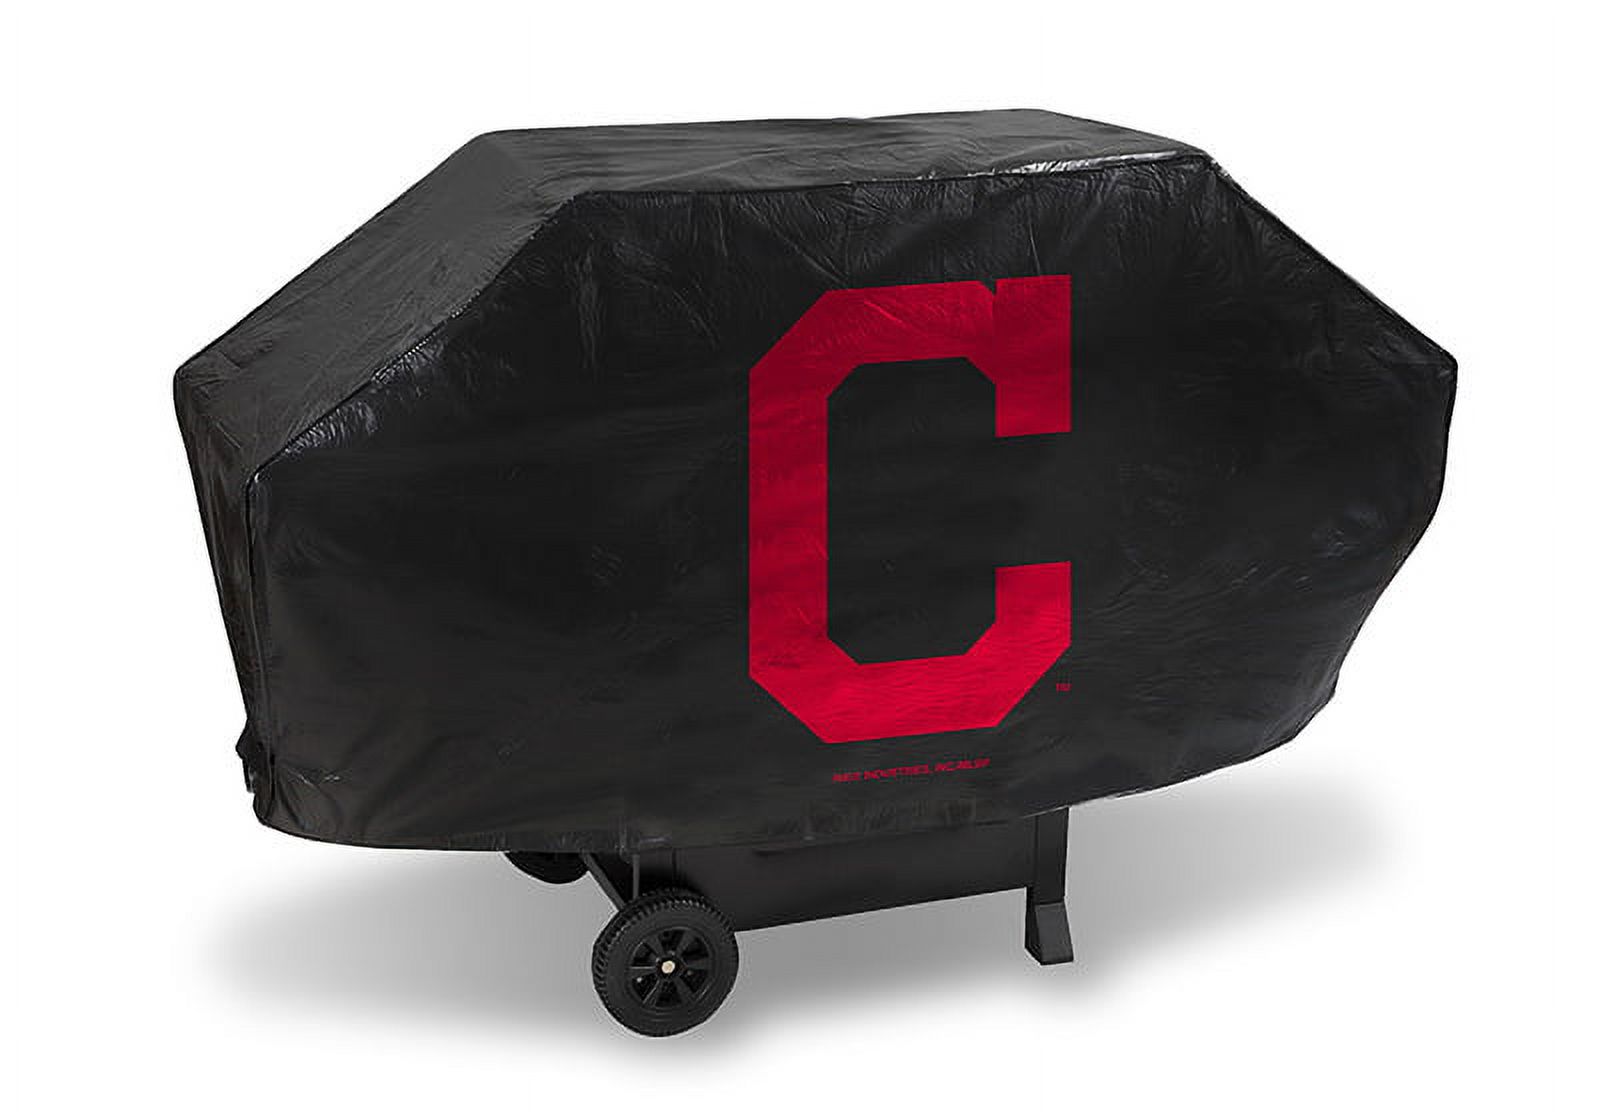 MLB - Rico Industries - Deluxe Grill Cover, Cleveland Indians - image 2 of 2